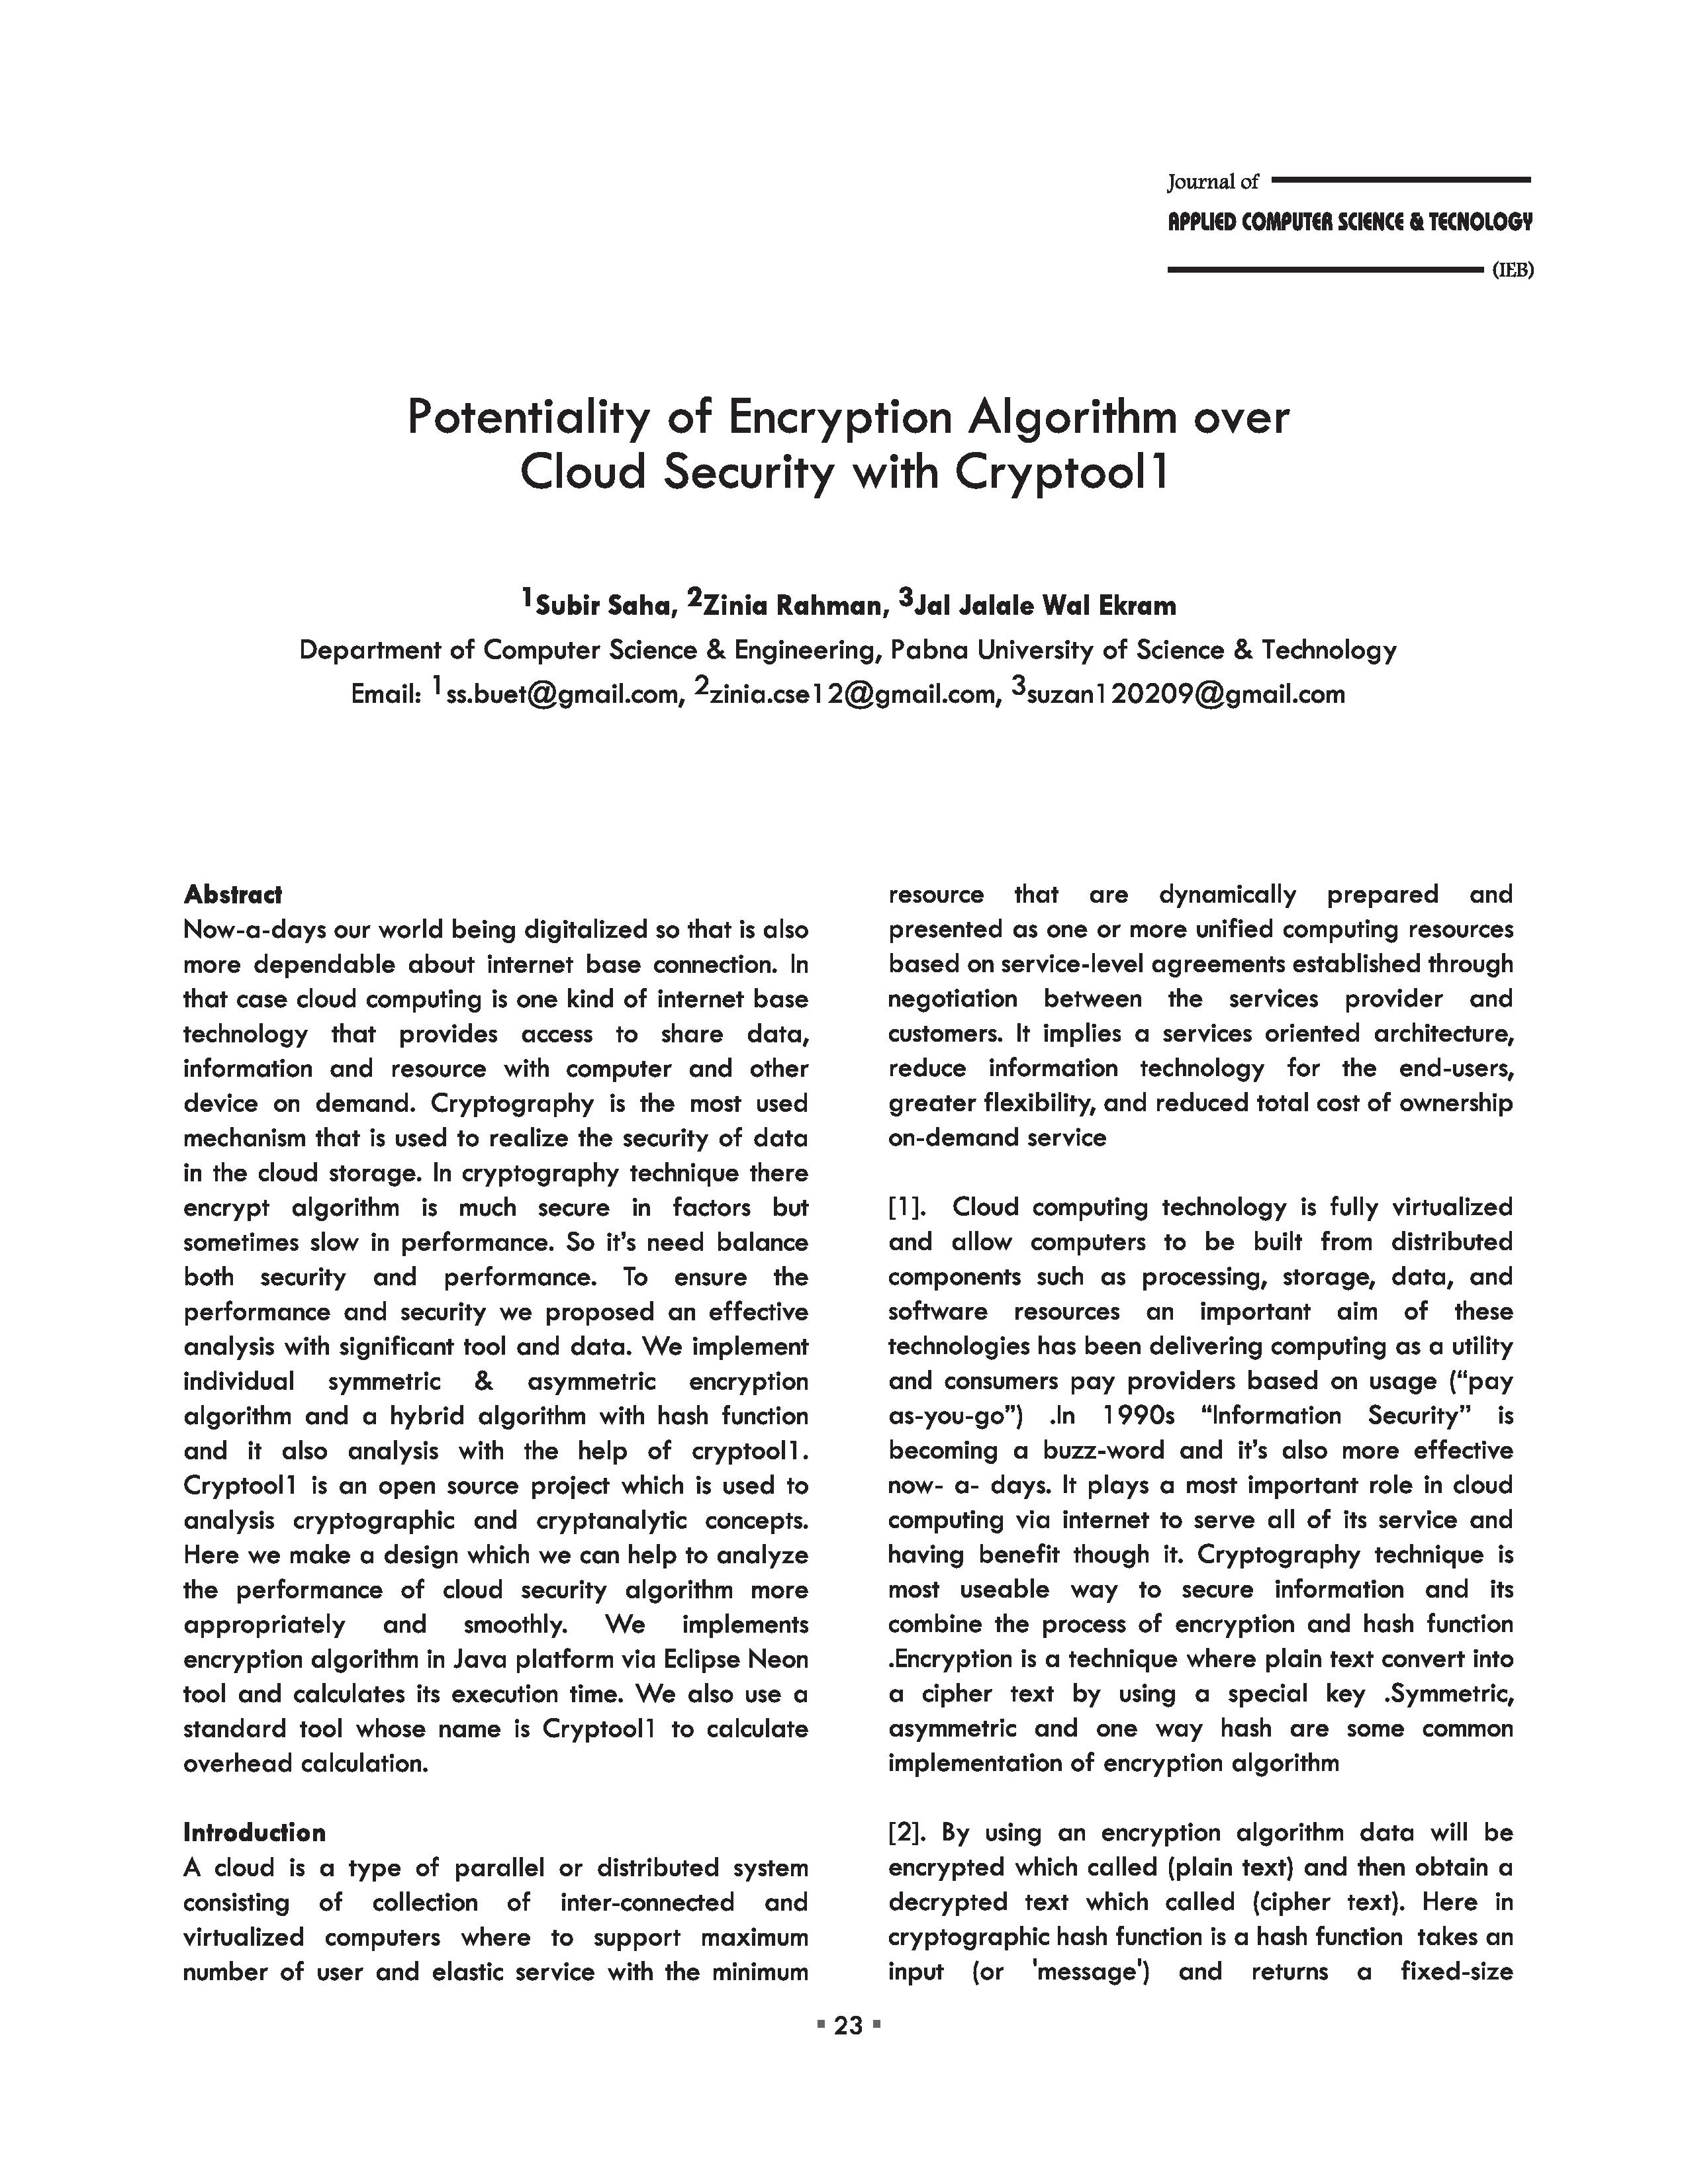 Potentiality of Encryption Algorithm over Cloud Security with Cryptool1